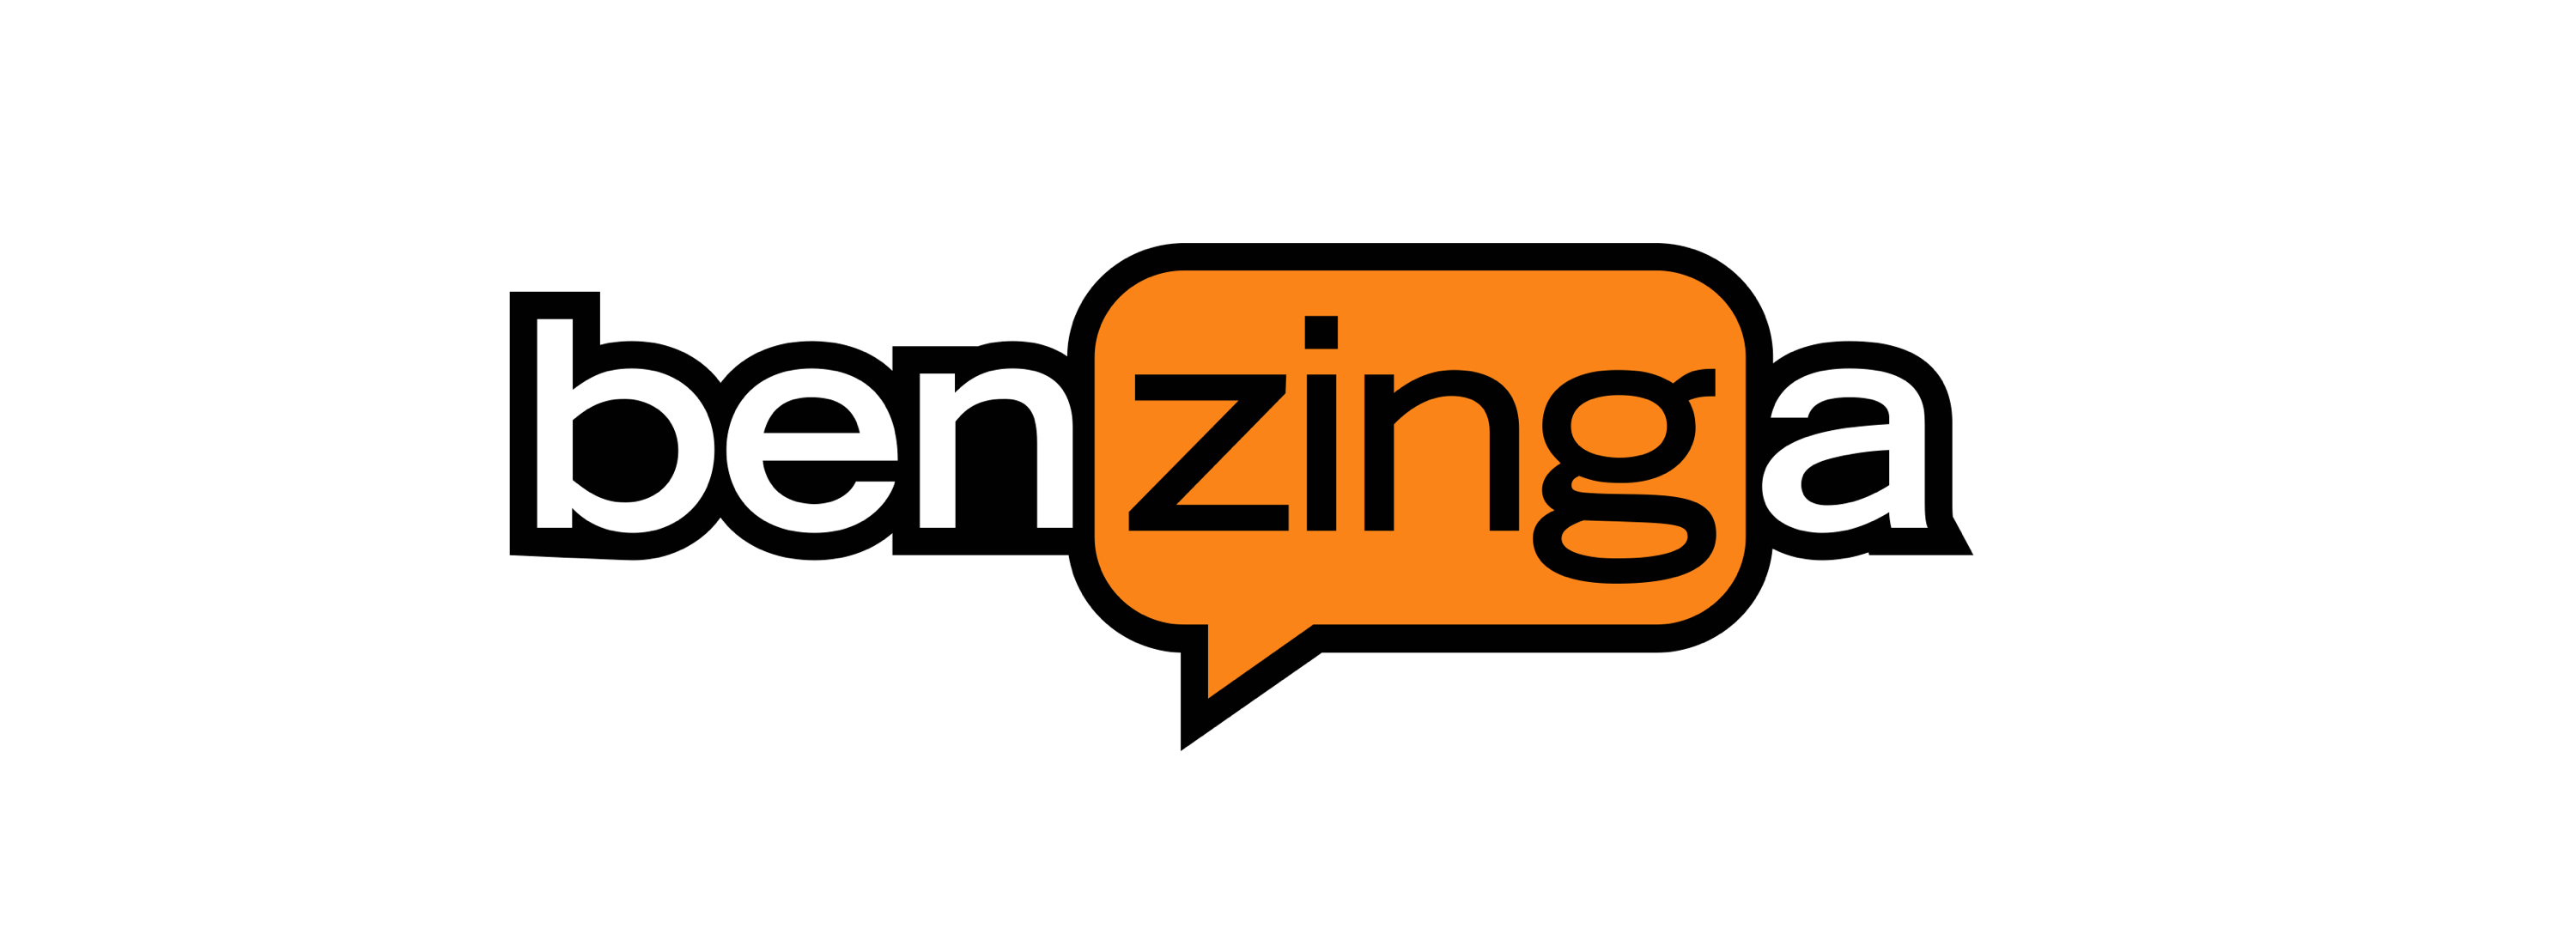 Featured on Benzinga educational resources page